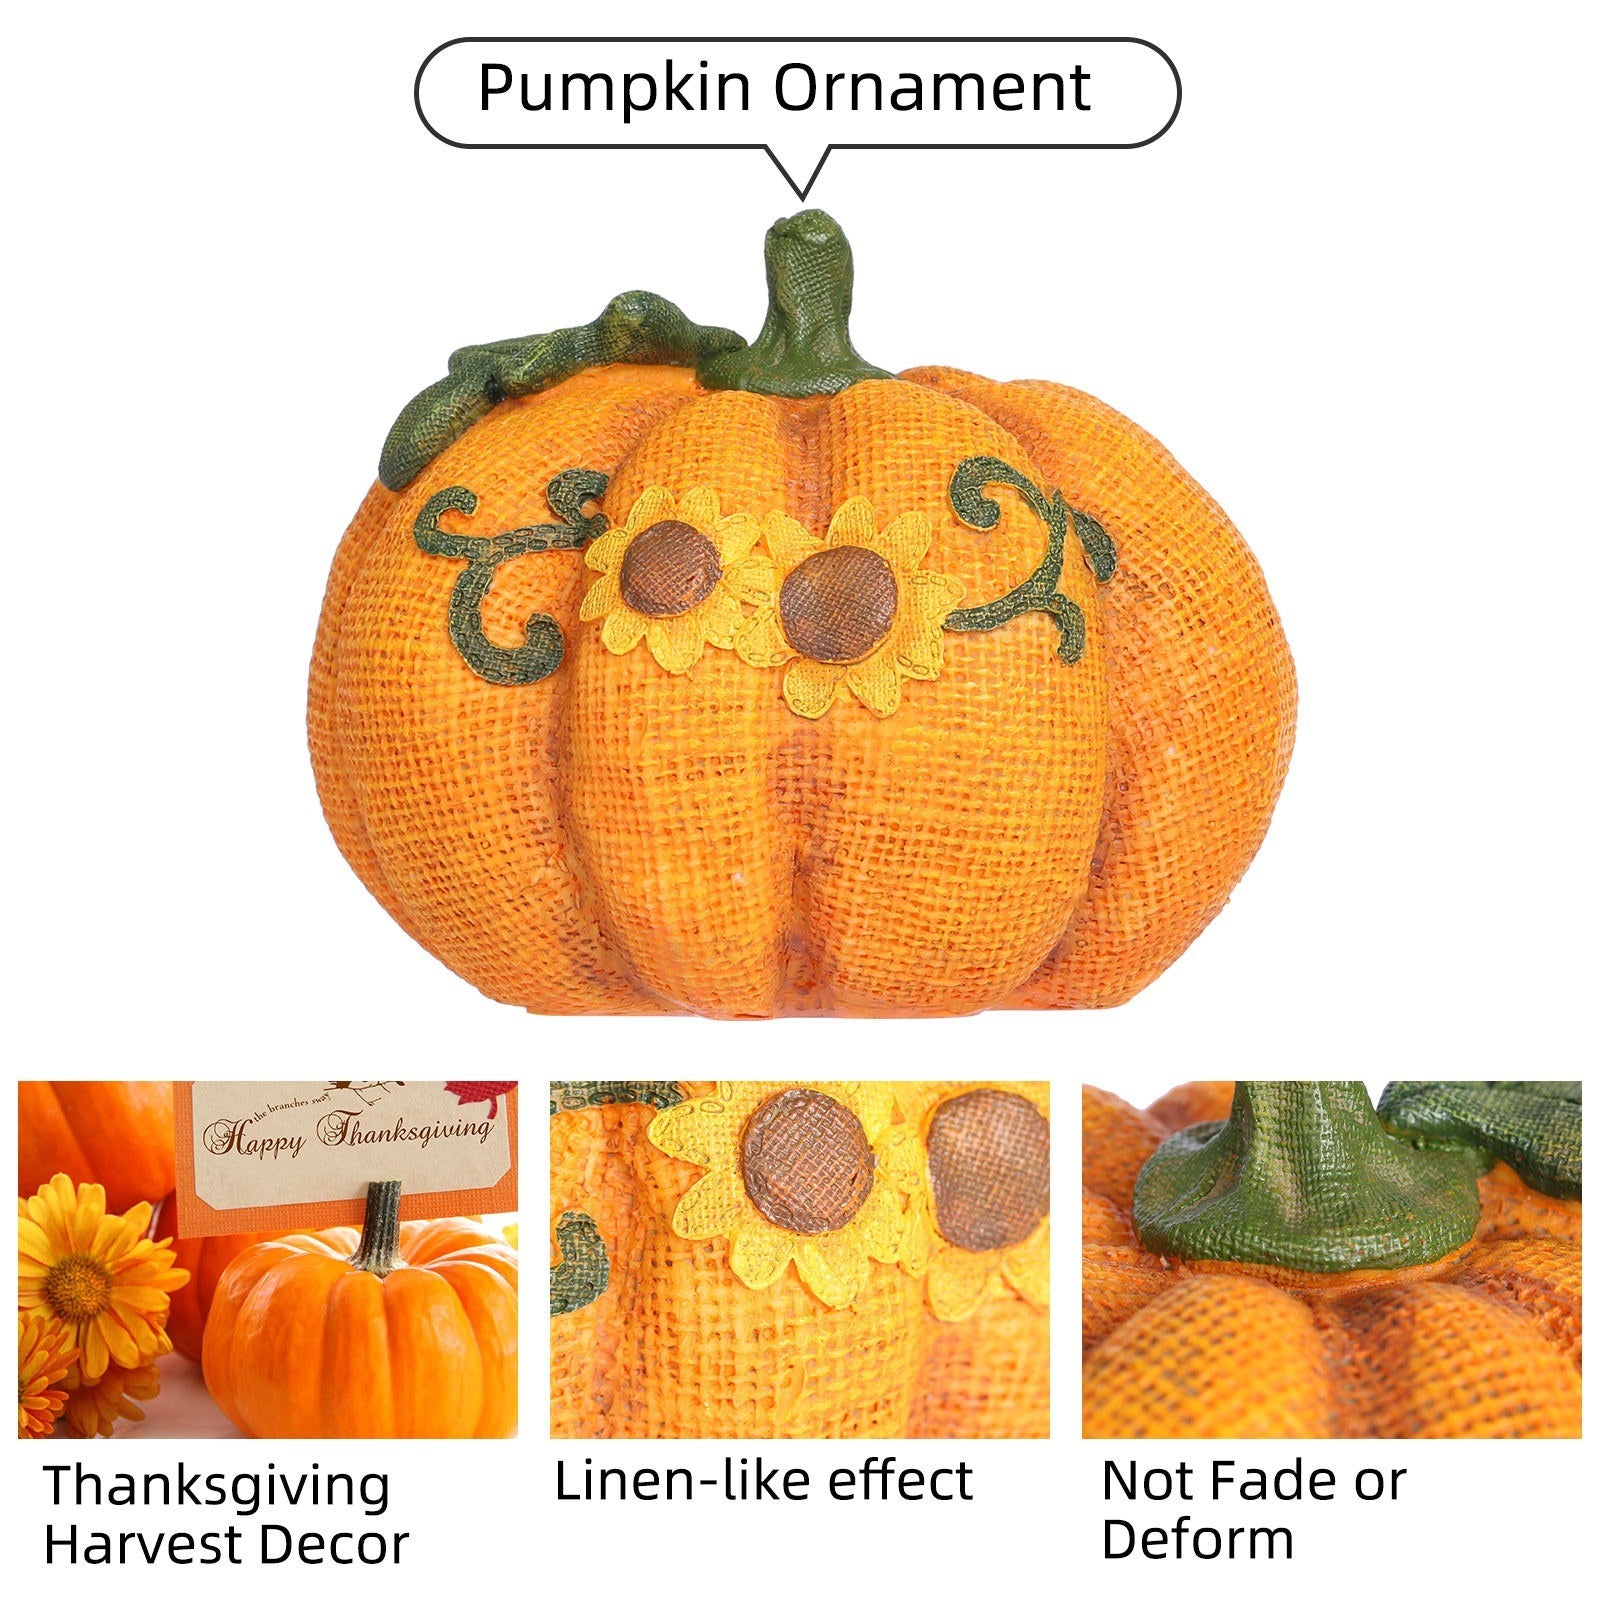 Give your home a warm and cozy feel with this festive pumpkin ornament